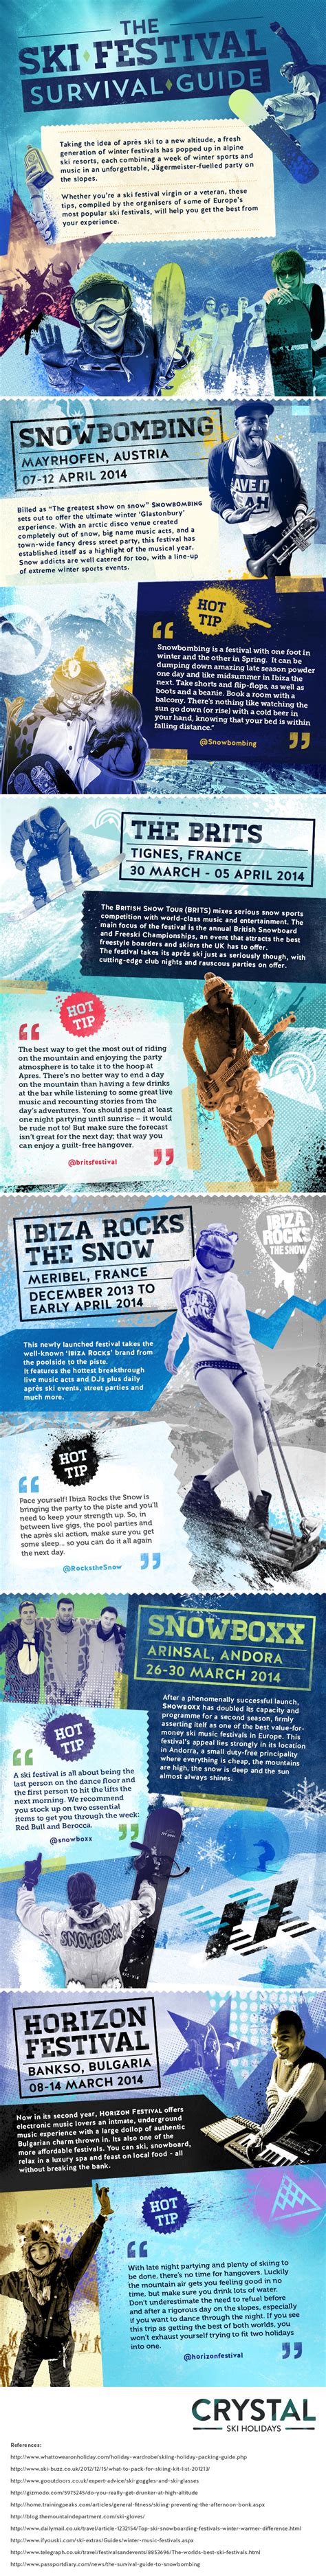 This Infographic For Crystal Ski Provides Information Surrounding The